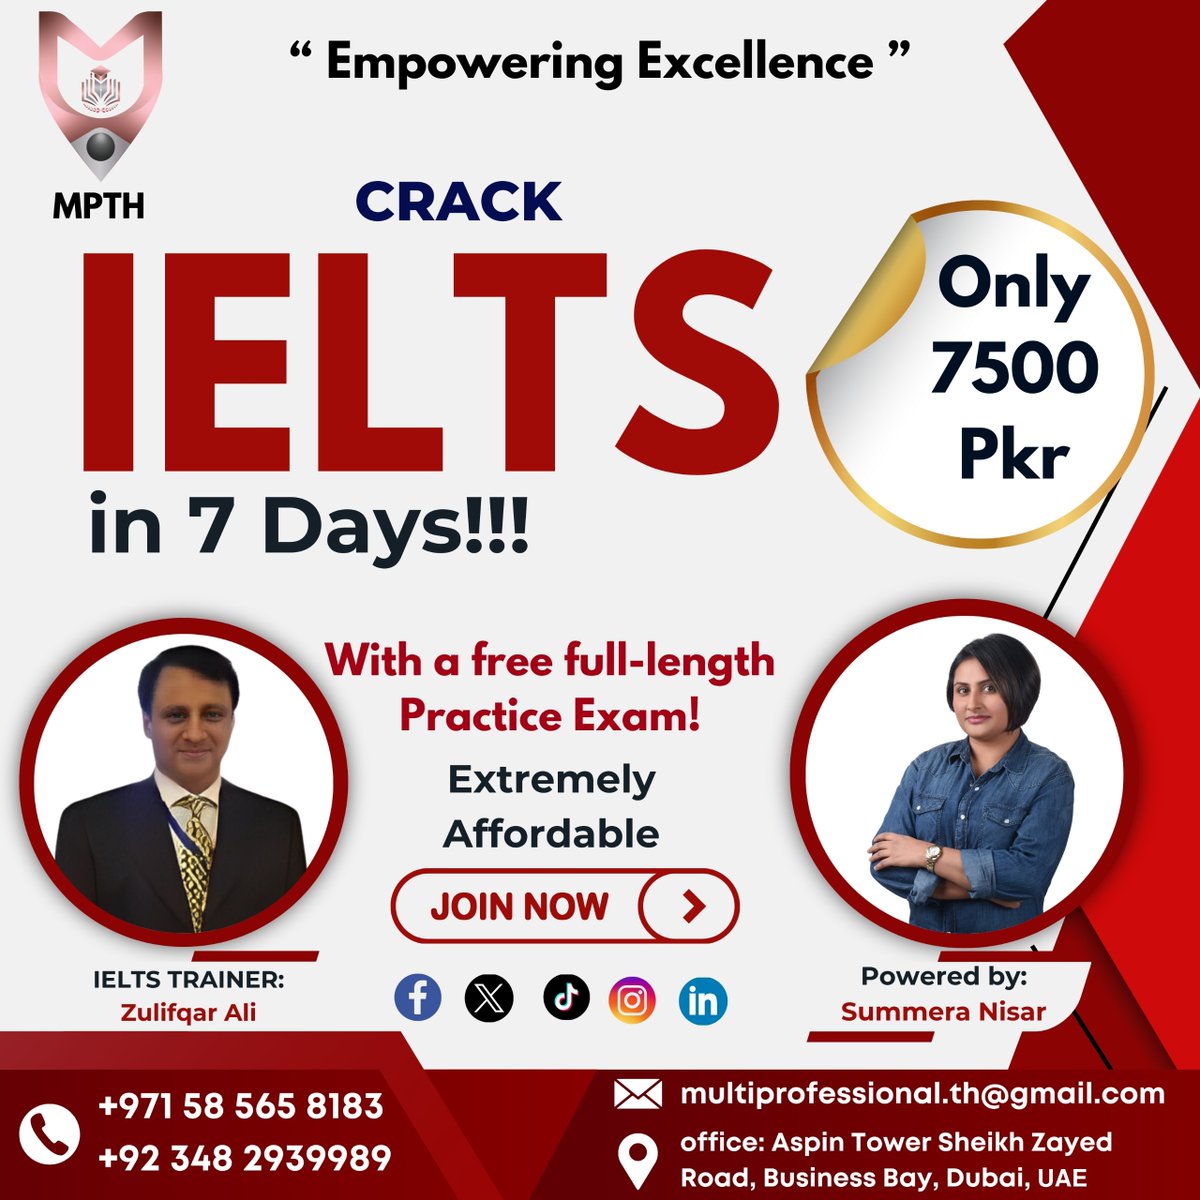 Crack the IELTS in 7 Days for 7500/- PKR
Join our intensive 7-day prep course with full-length practice exams to boost your confidence and improve your scores. 
Contact us :+971 58 565 8183 | +92 348 2939989
#IELTS #PracticeExams #StudyAbroad #ExamPrep #AchieveYourDreams